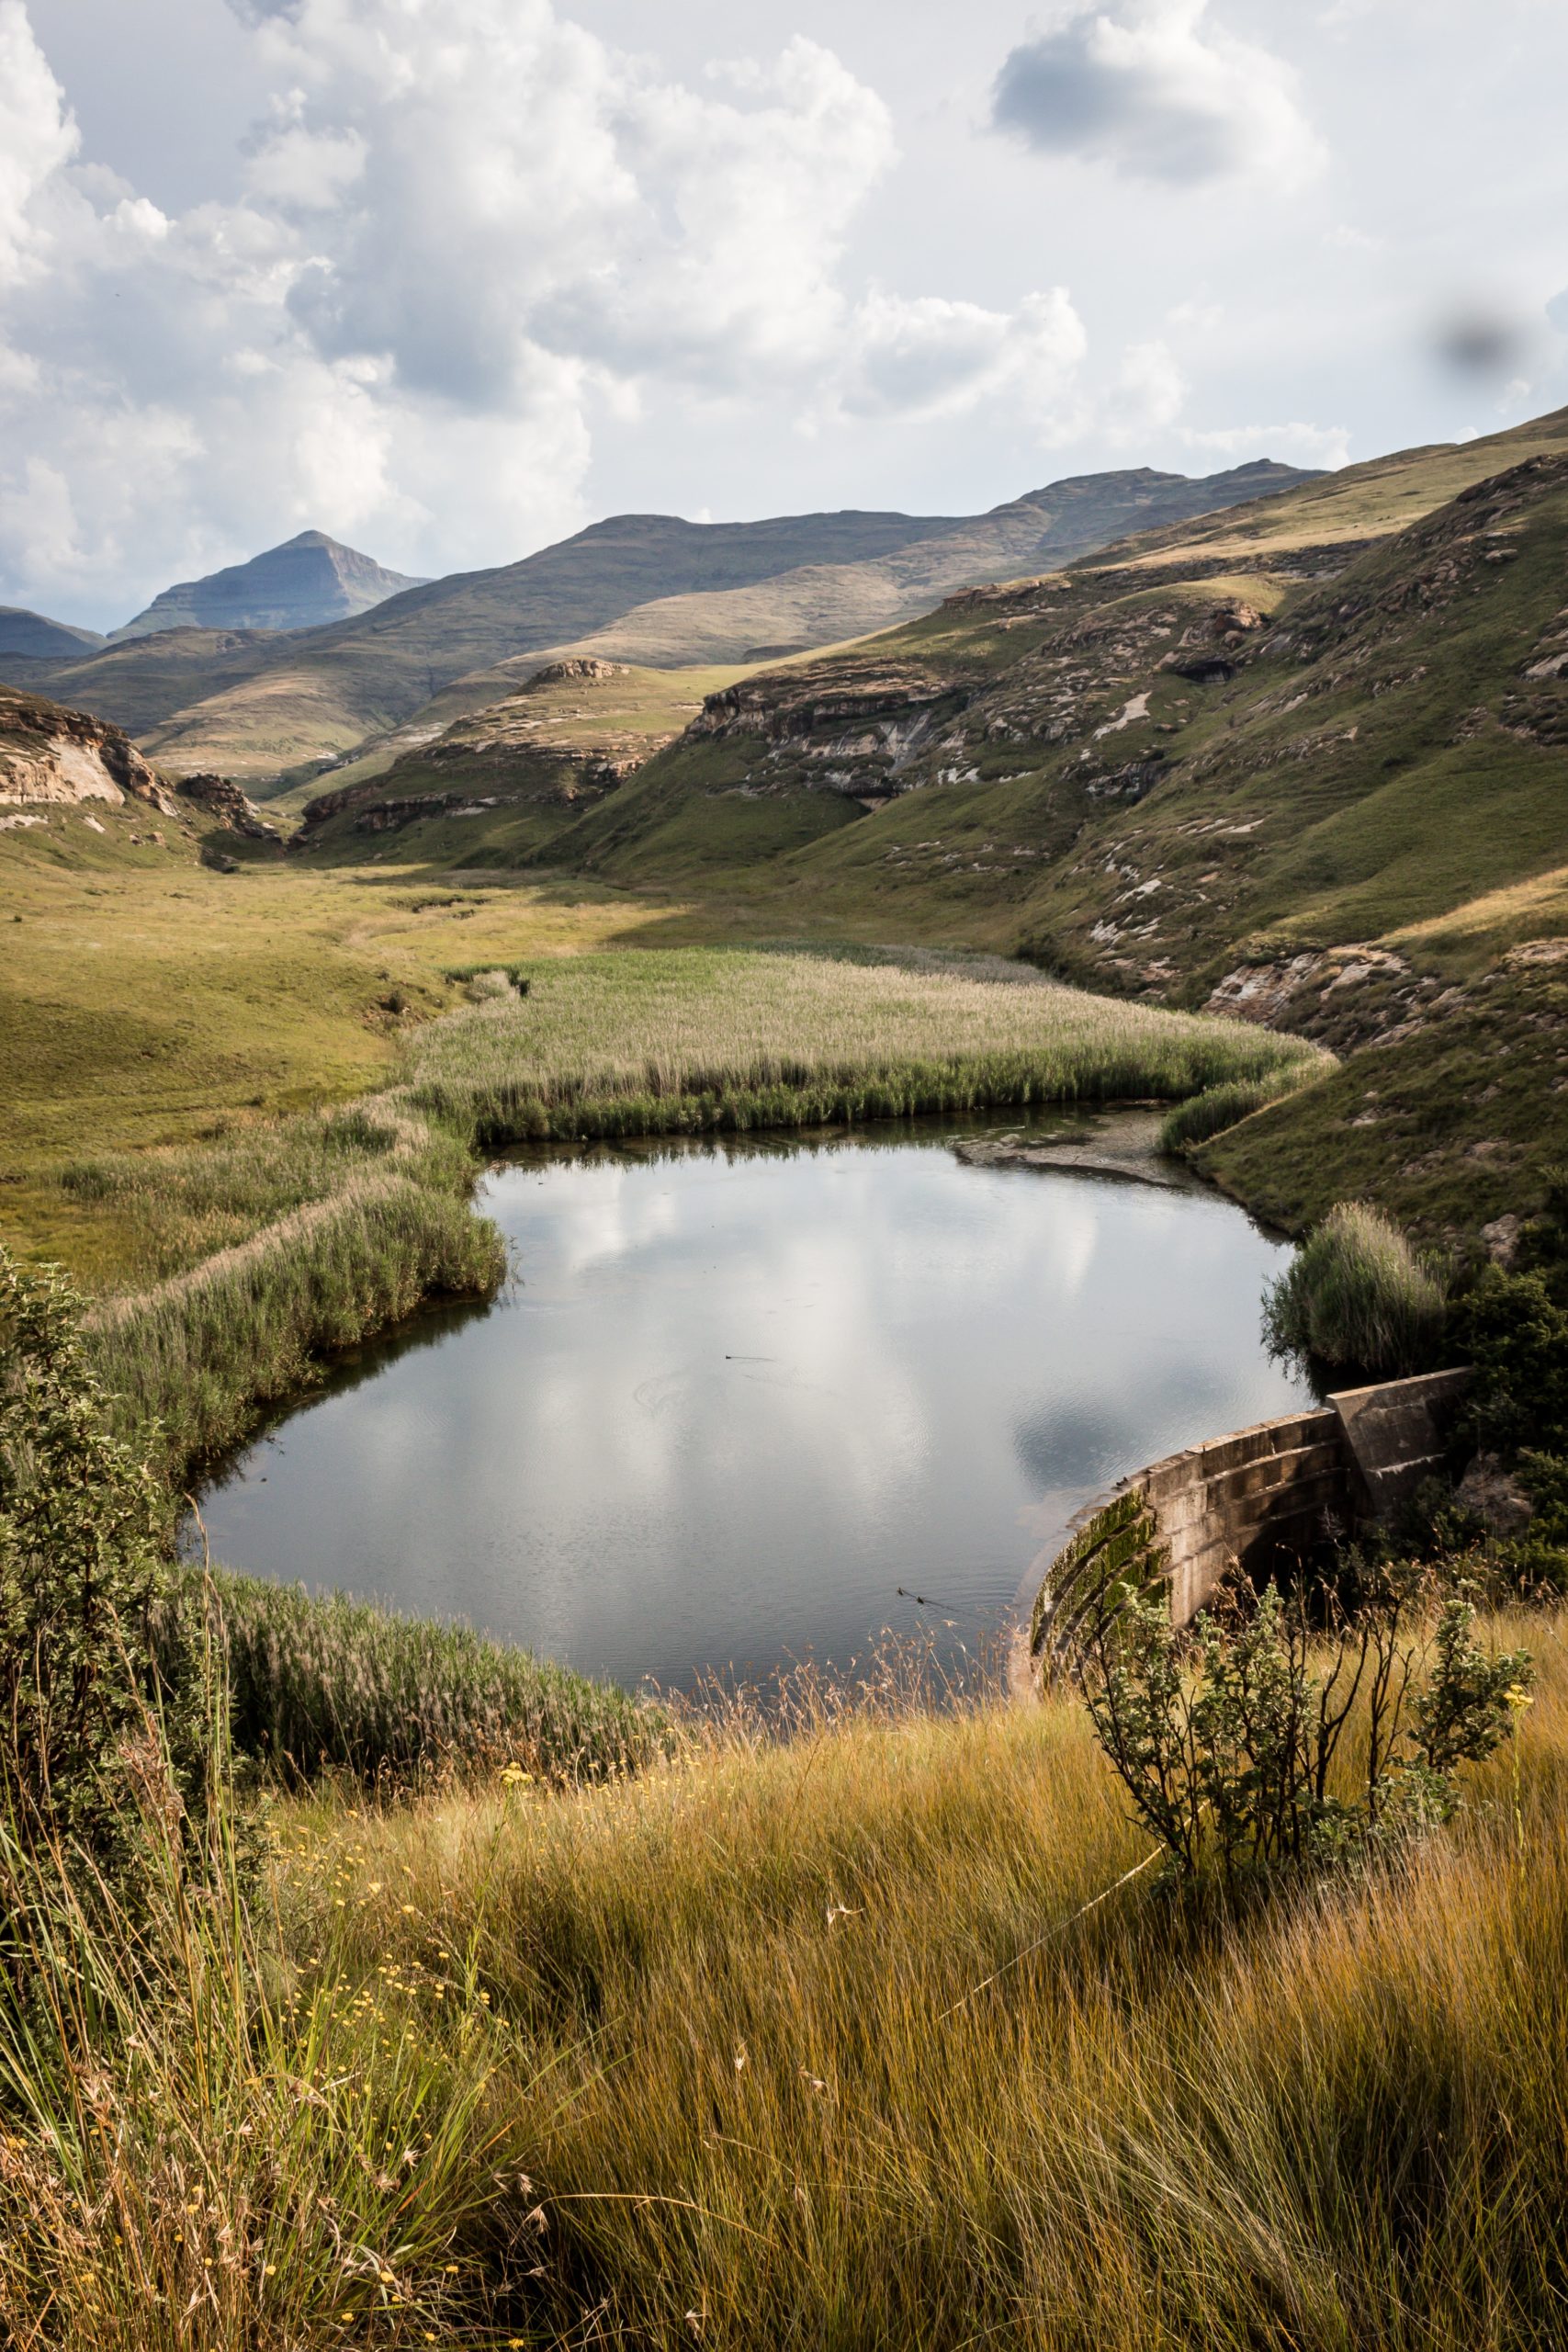 small lake surrounded by hills and reflecting cloudy skies in South Africa